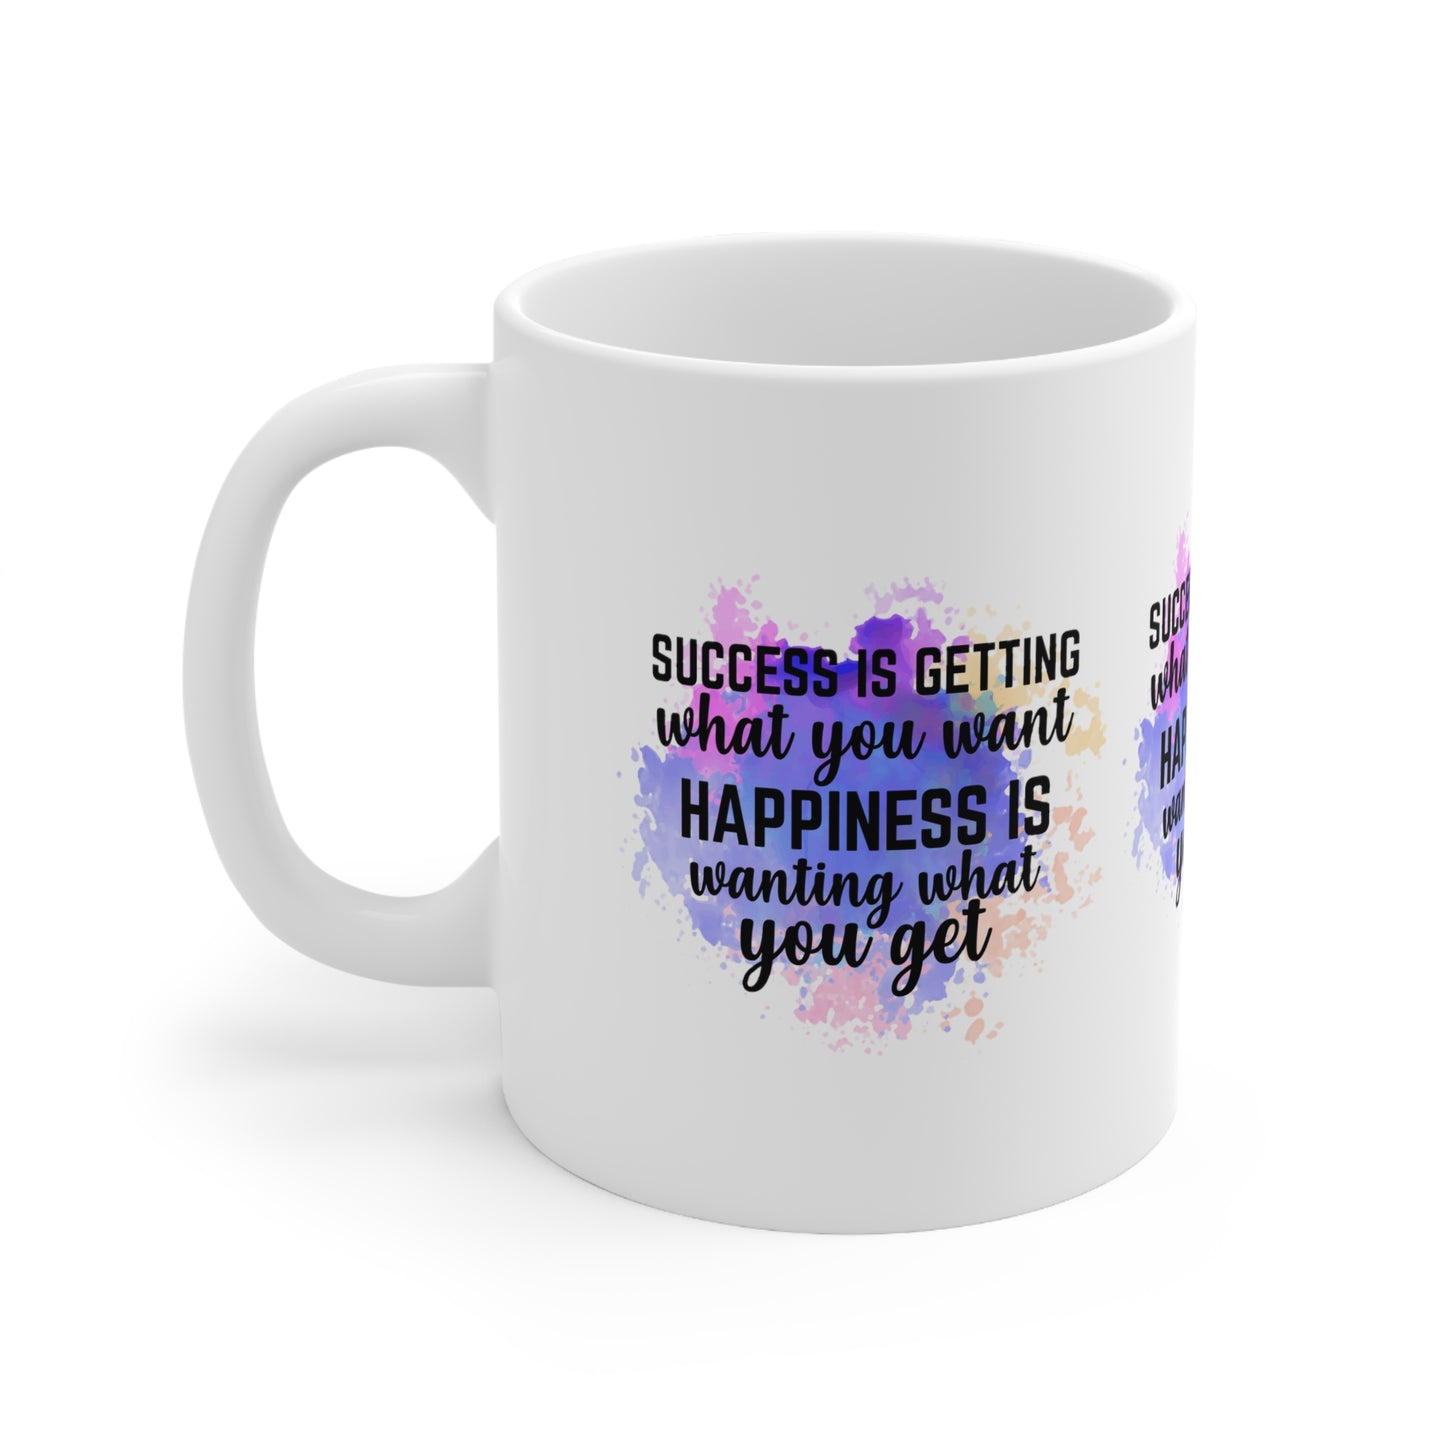 "SUCCESS is getting what you want. HAPINESS is wanting what you get" Inspirational Mug - MUGSCITY - Free Shipping.